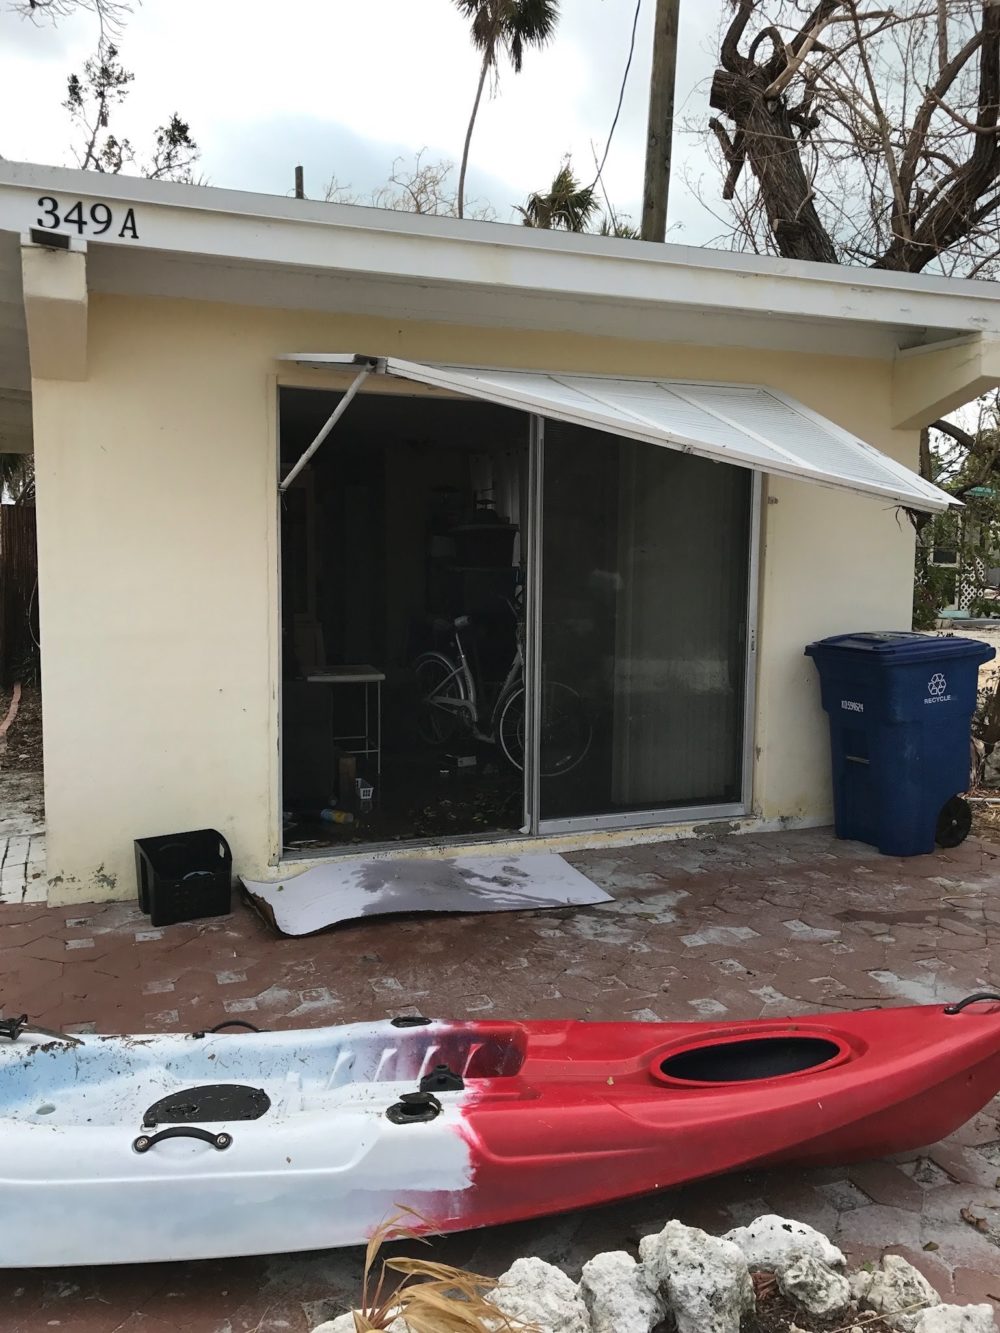 The outside of her house post-Irma. She says the kayak is not hers. It's one of the many items that washed up onto her property. (Courtesy of Rittel) 